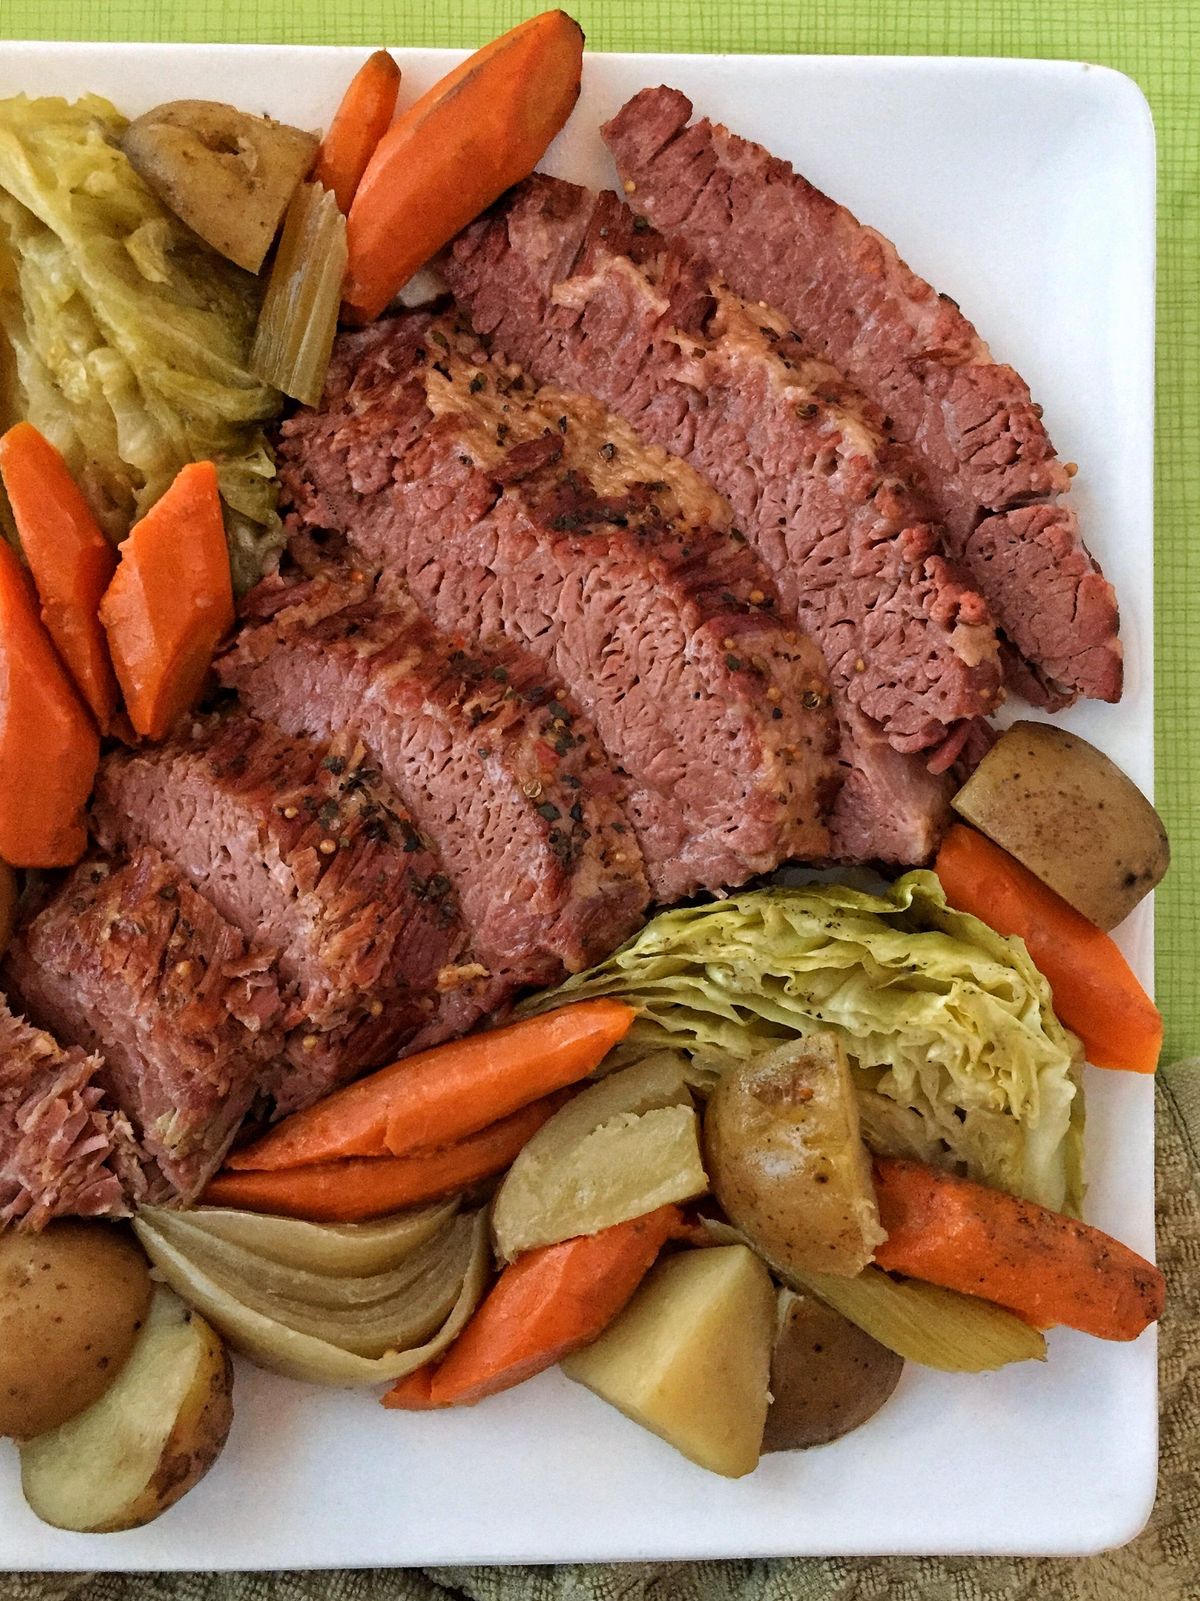 With a slow-cooker, corned beef and cabbage is easy to make. (Audrey Alfaro)